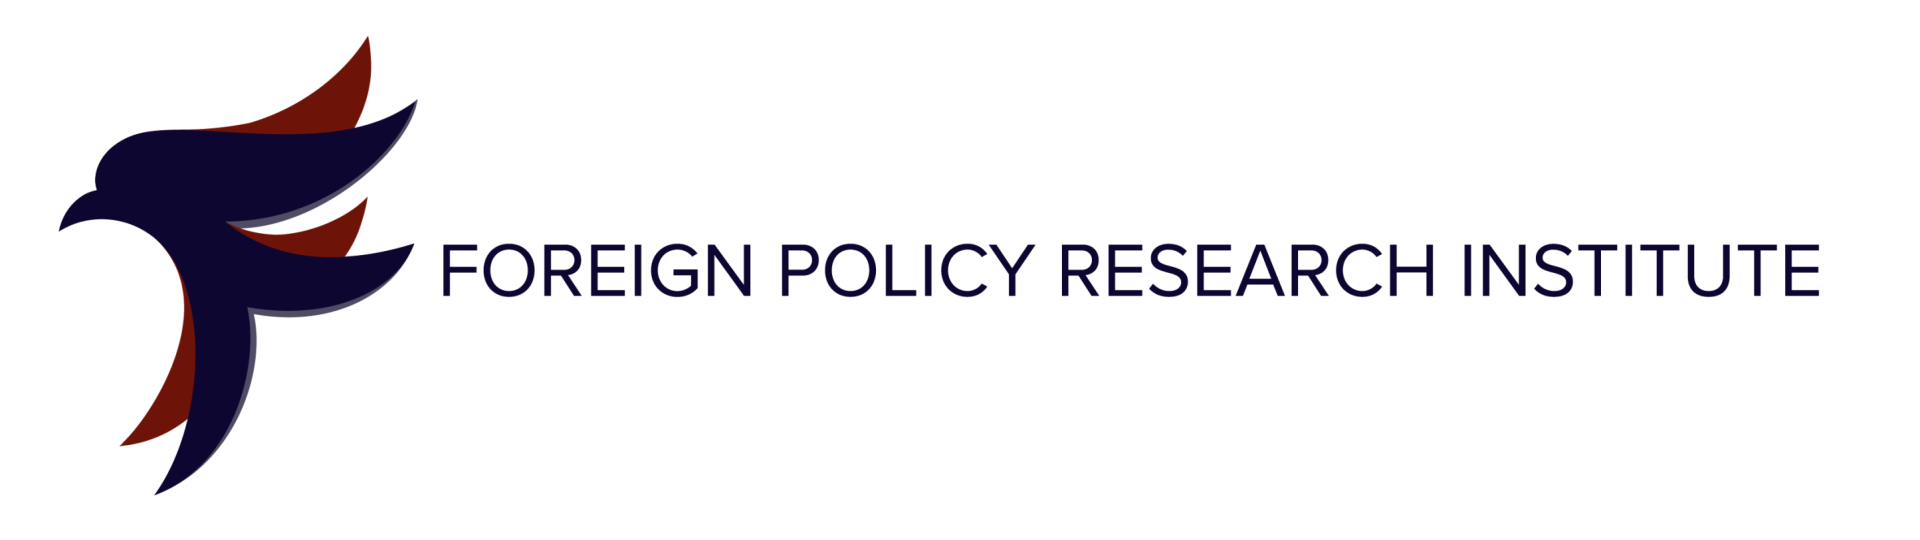 Foreign Policy Research Institute